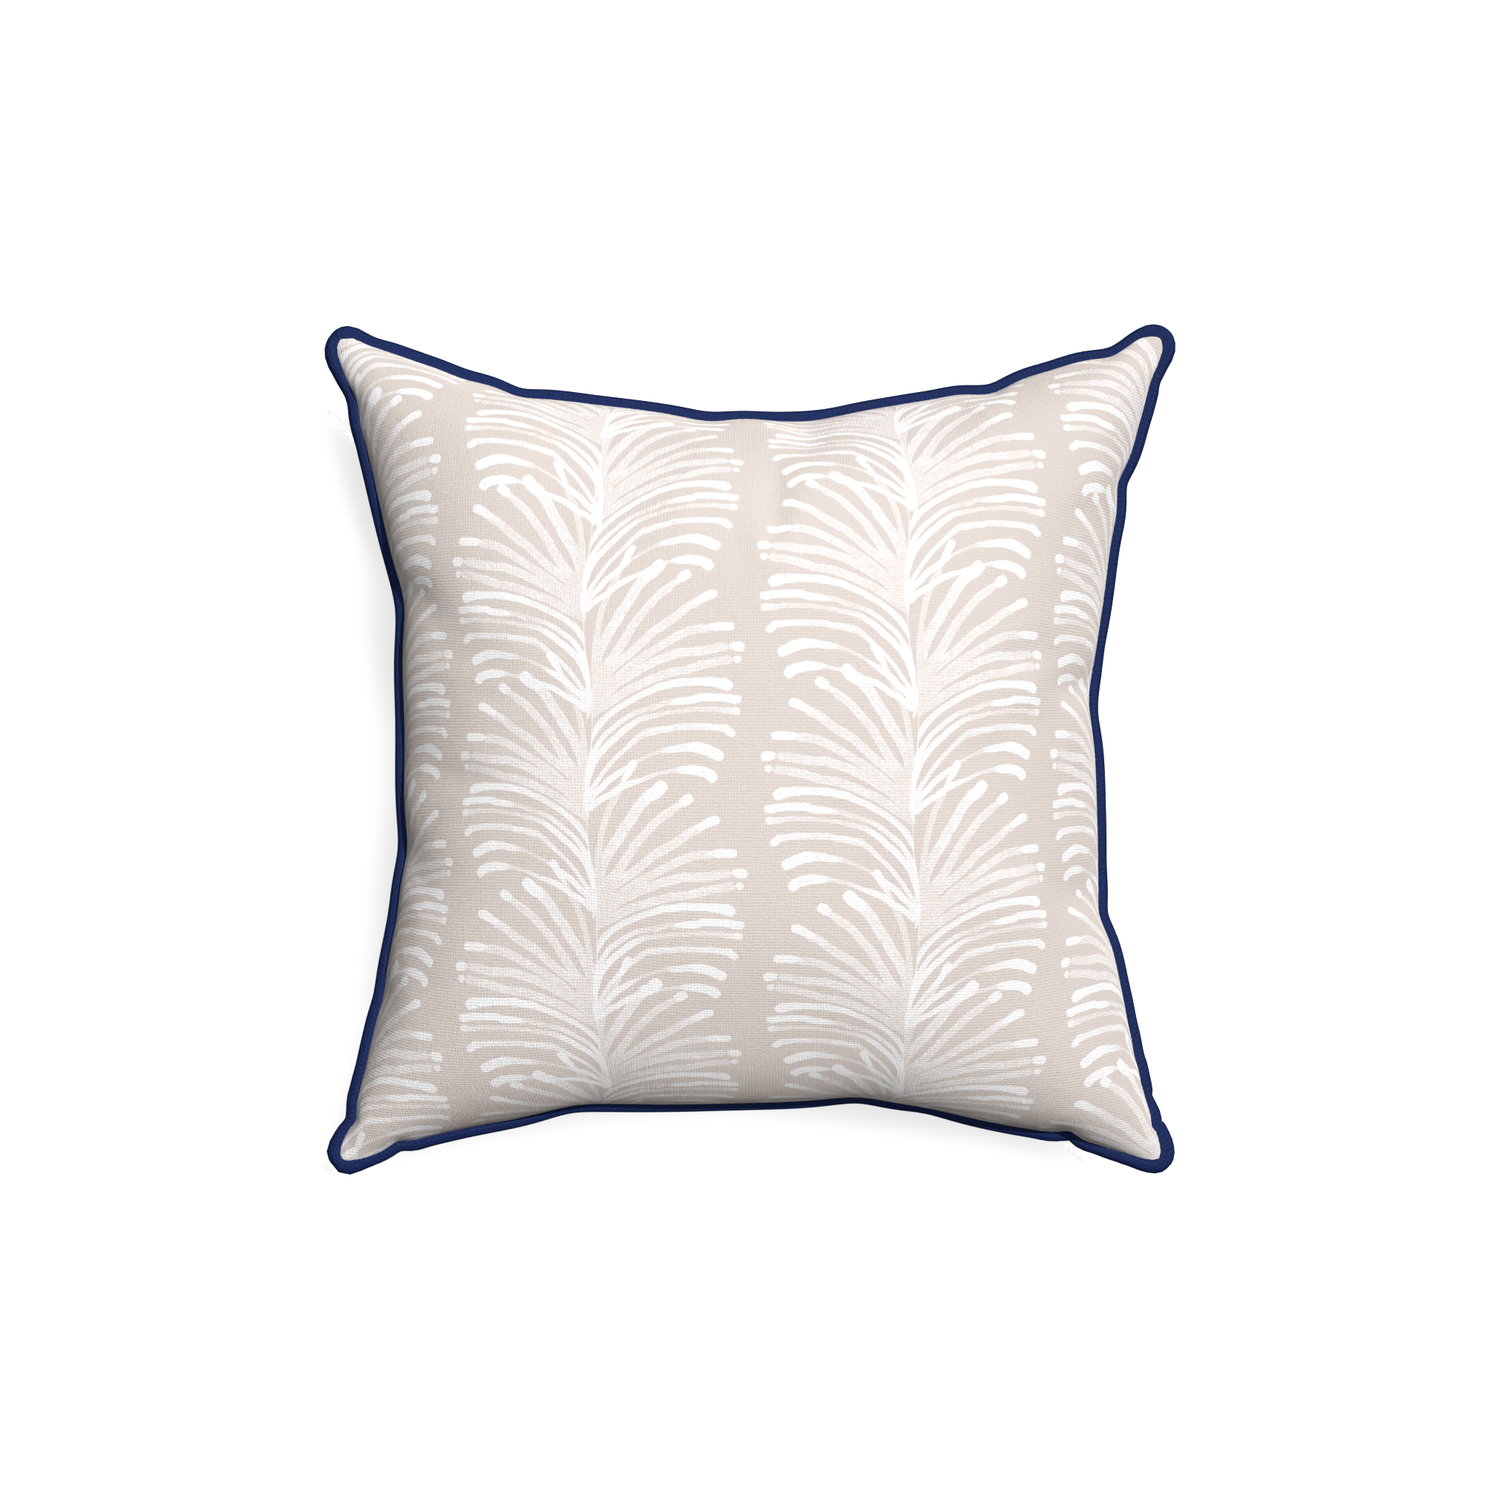 18-square emma sand custom sand colored botanical stripepillow with midnight piping on white background